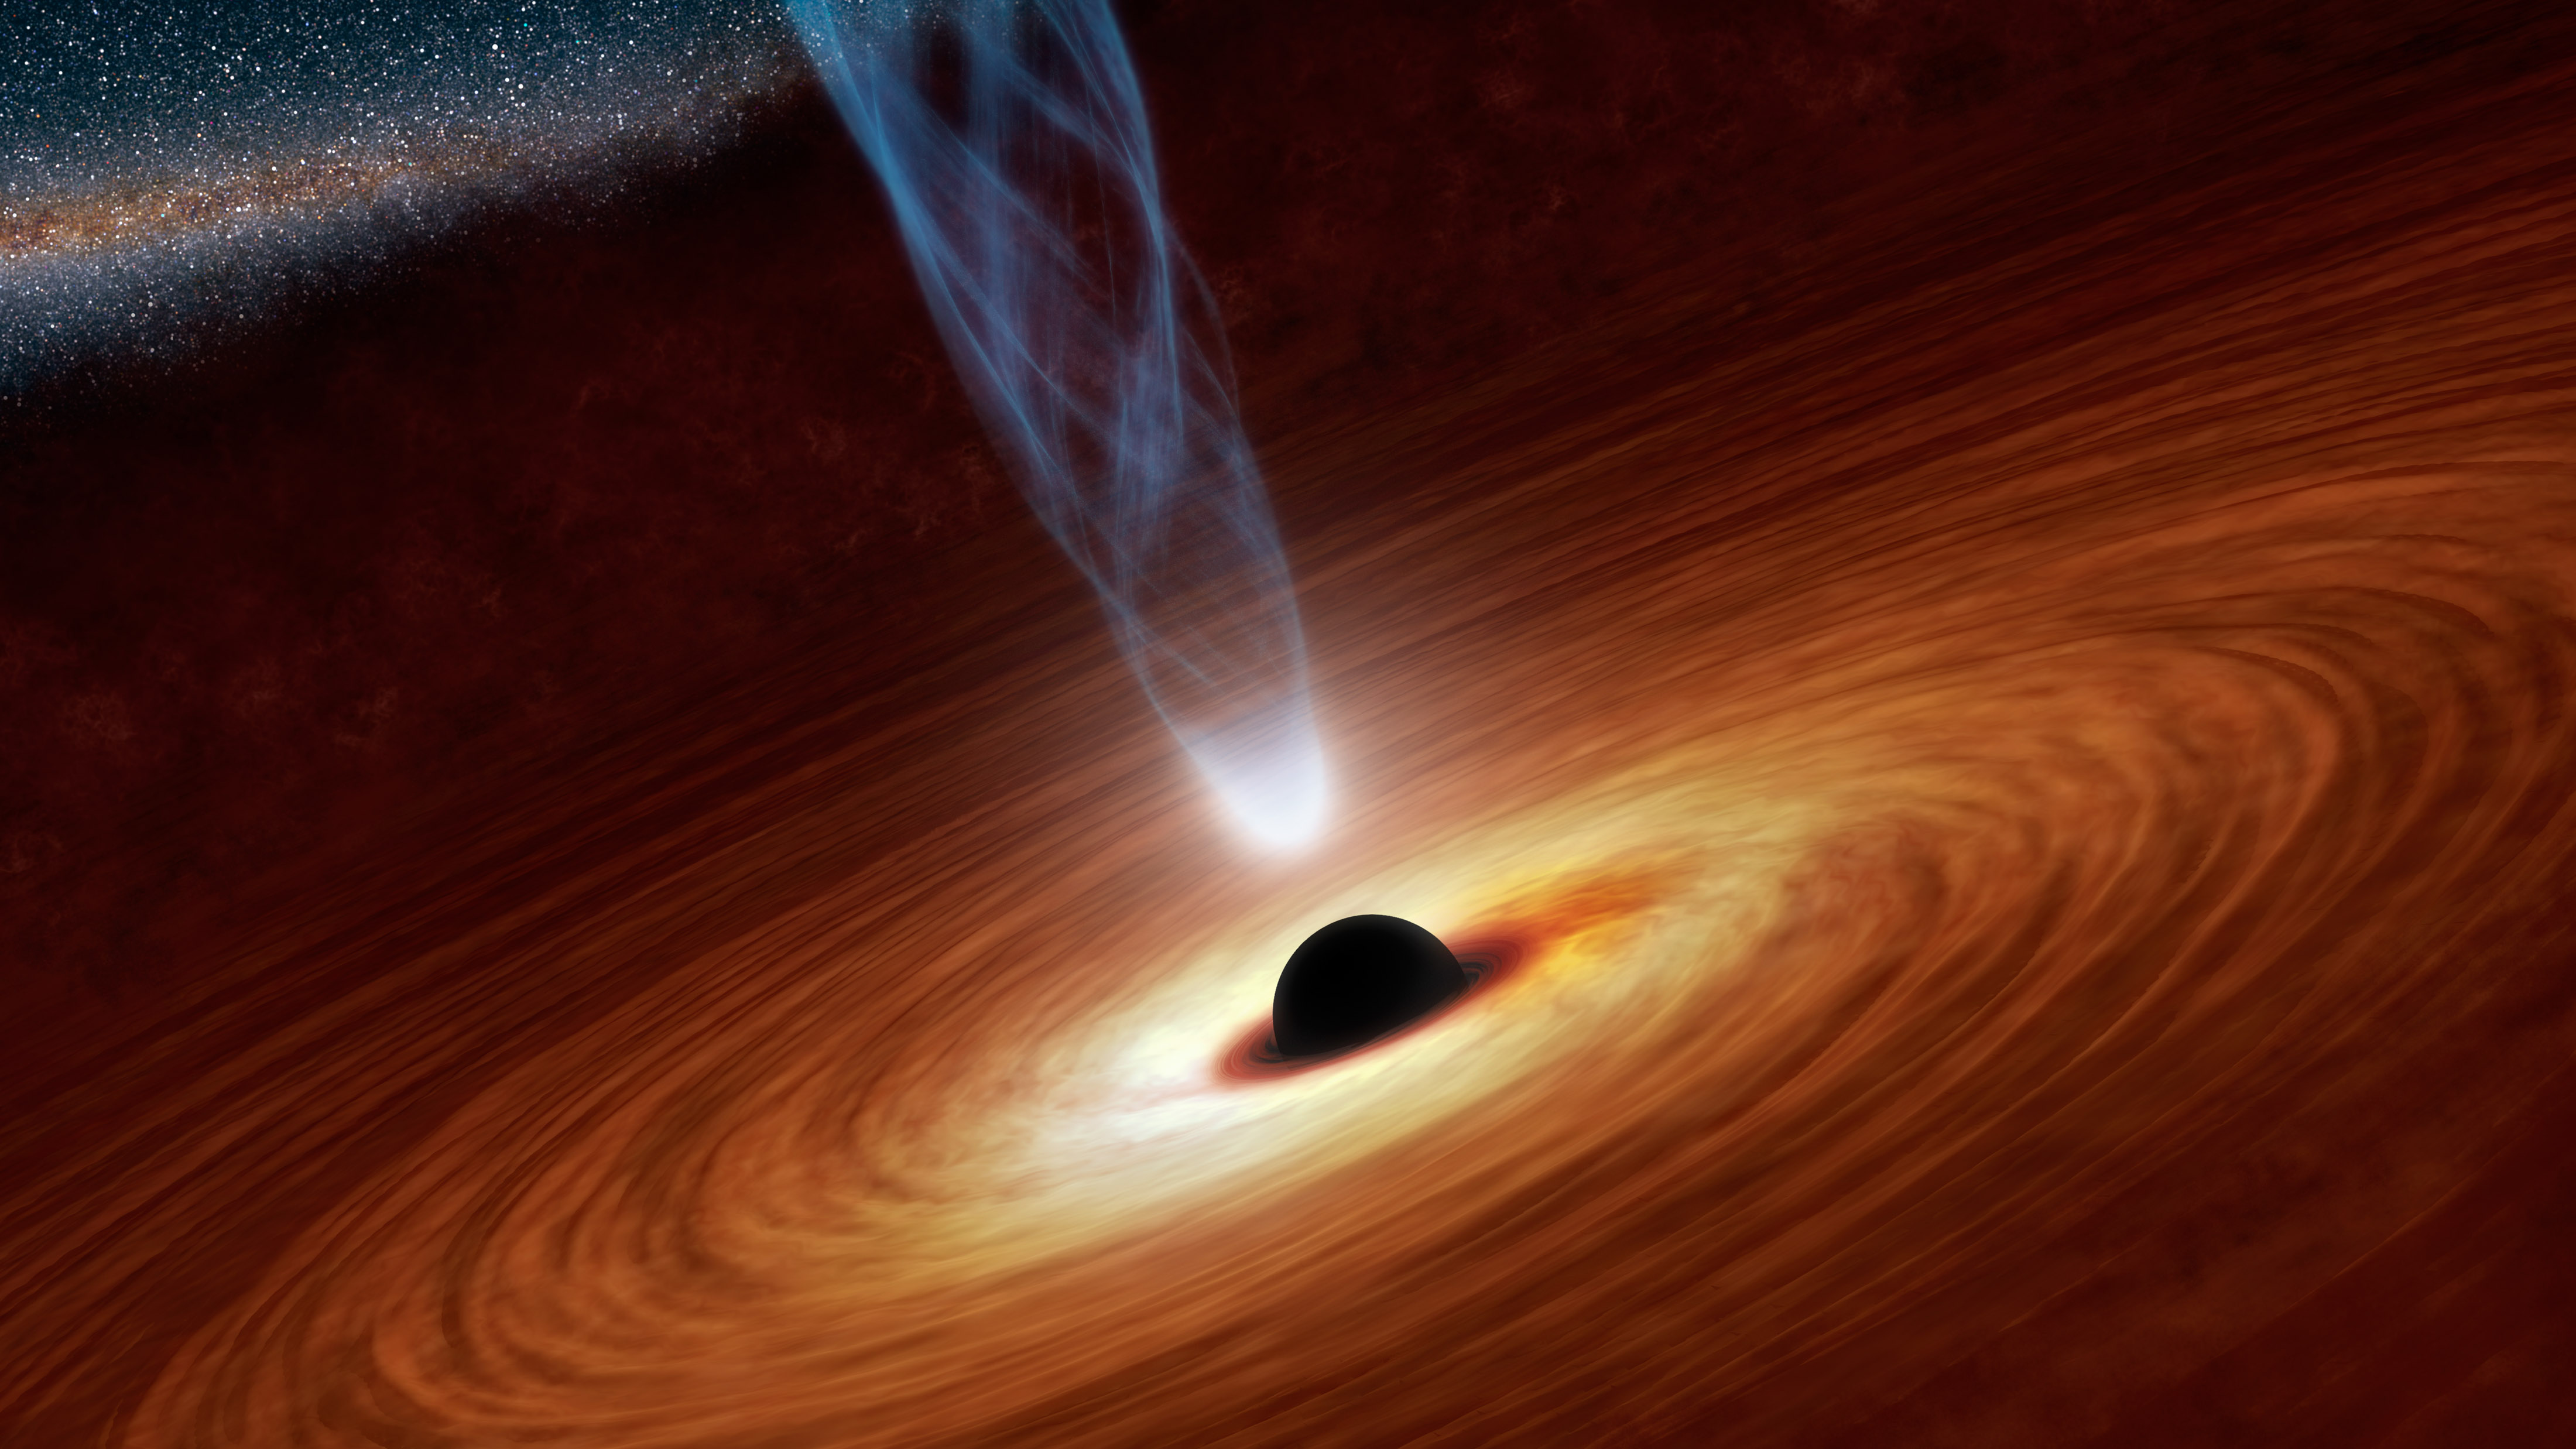 Image: Scientists use computer simulations to understand the possibility of hyperspace travel via black holes